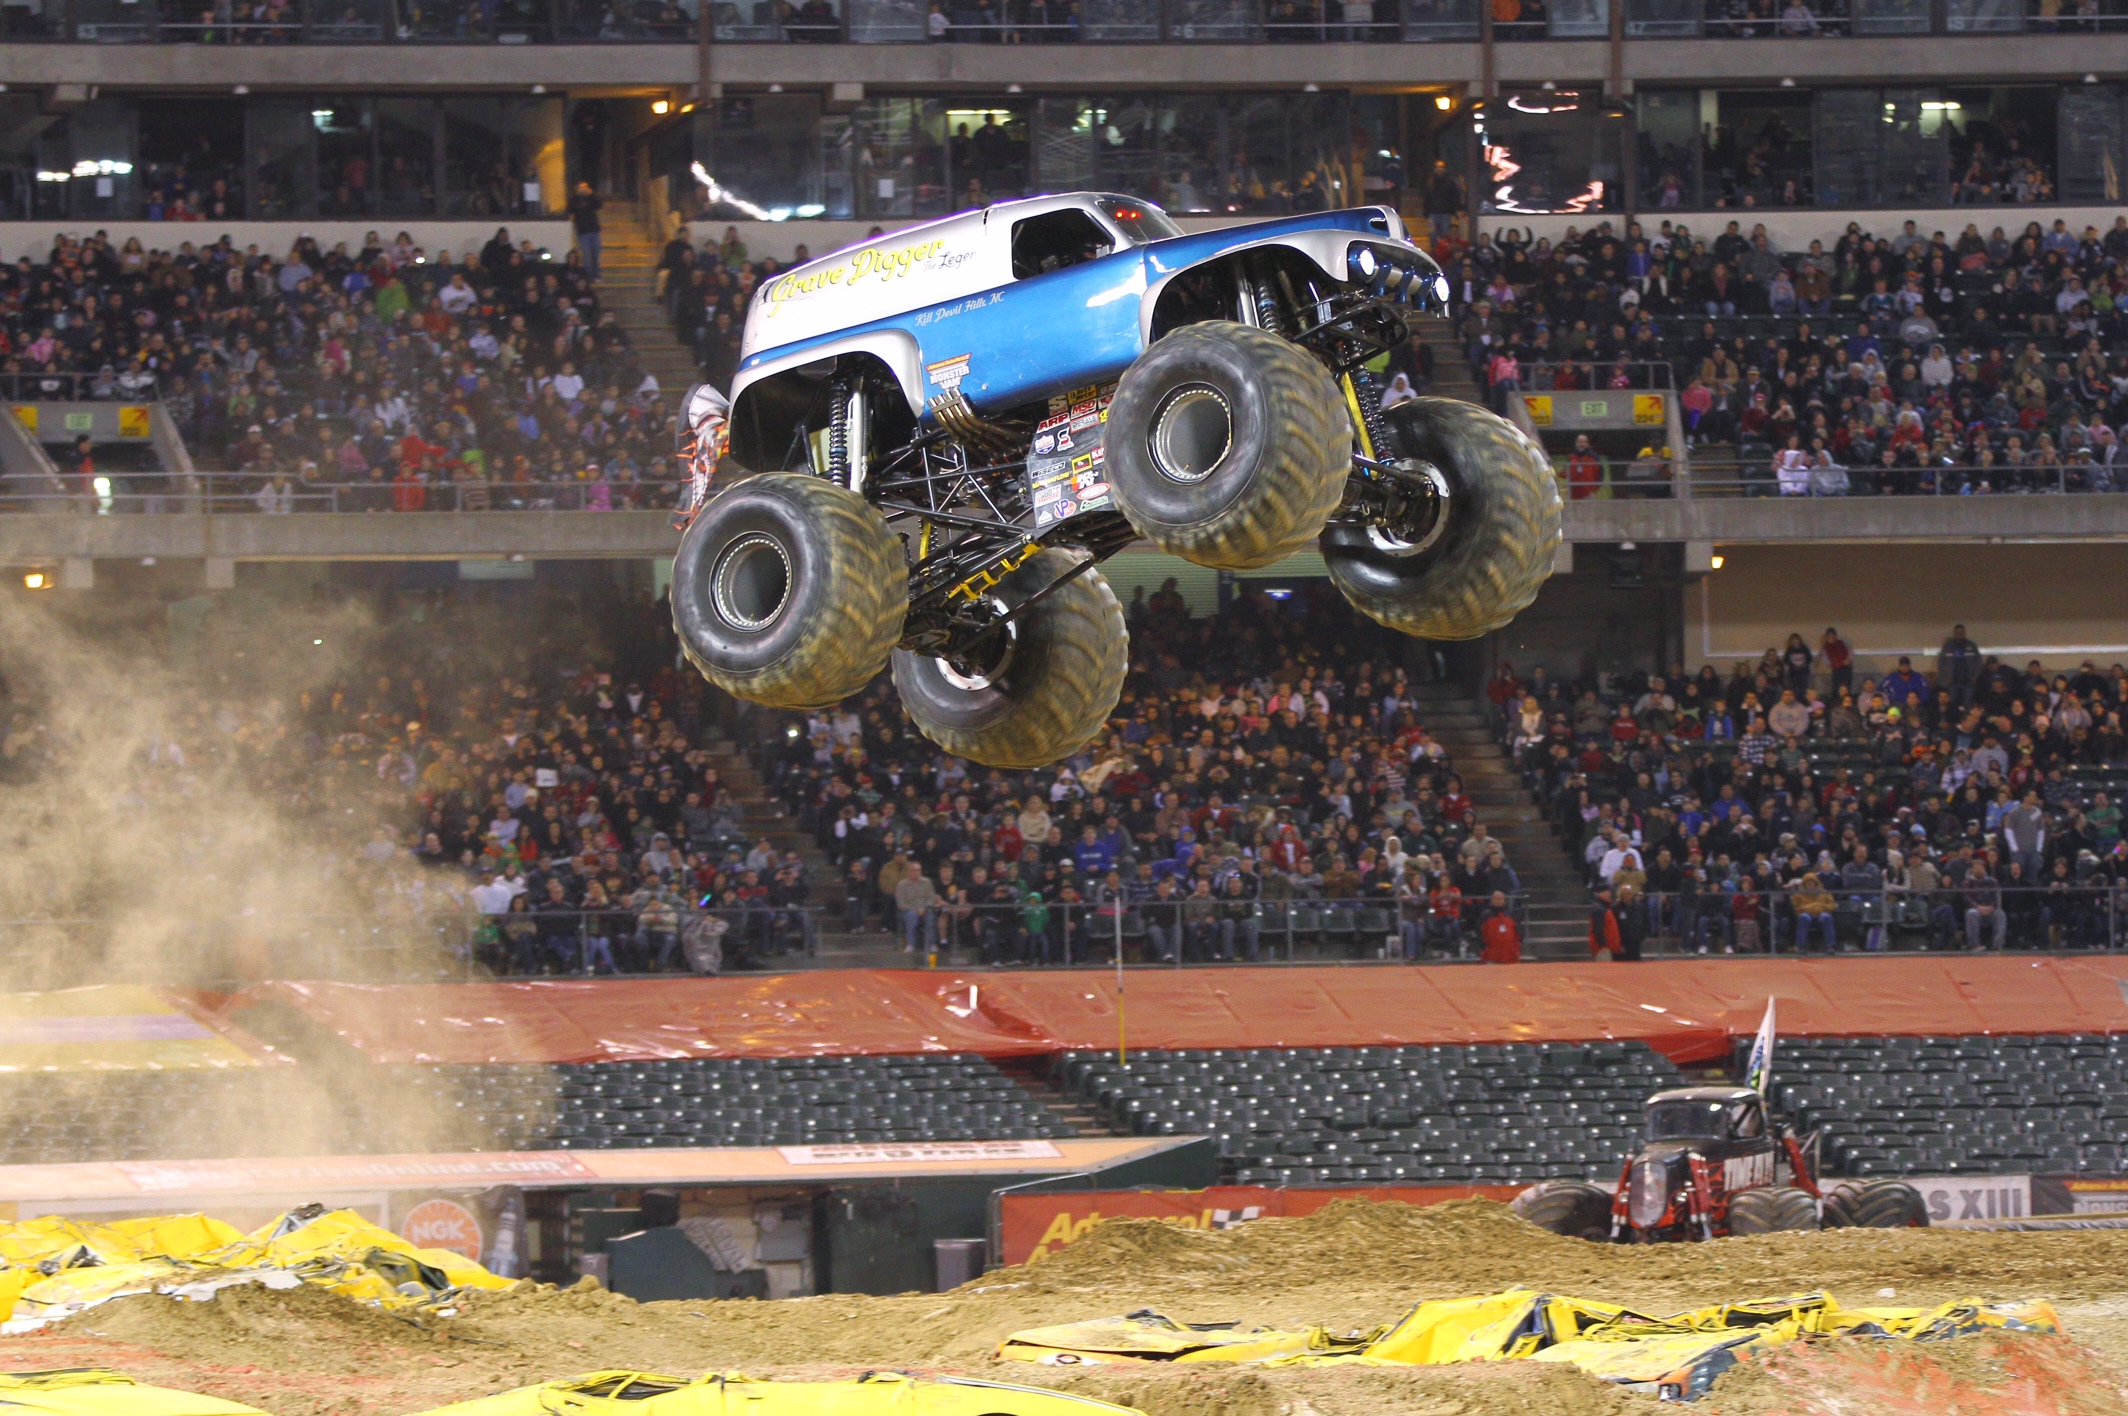 Orlando to host Monster Jam marquee event in 2019, 2020 - Orlando Business  Journal